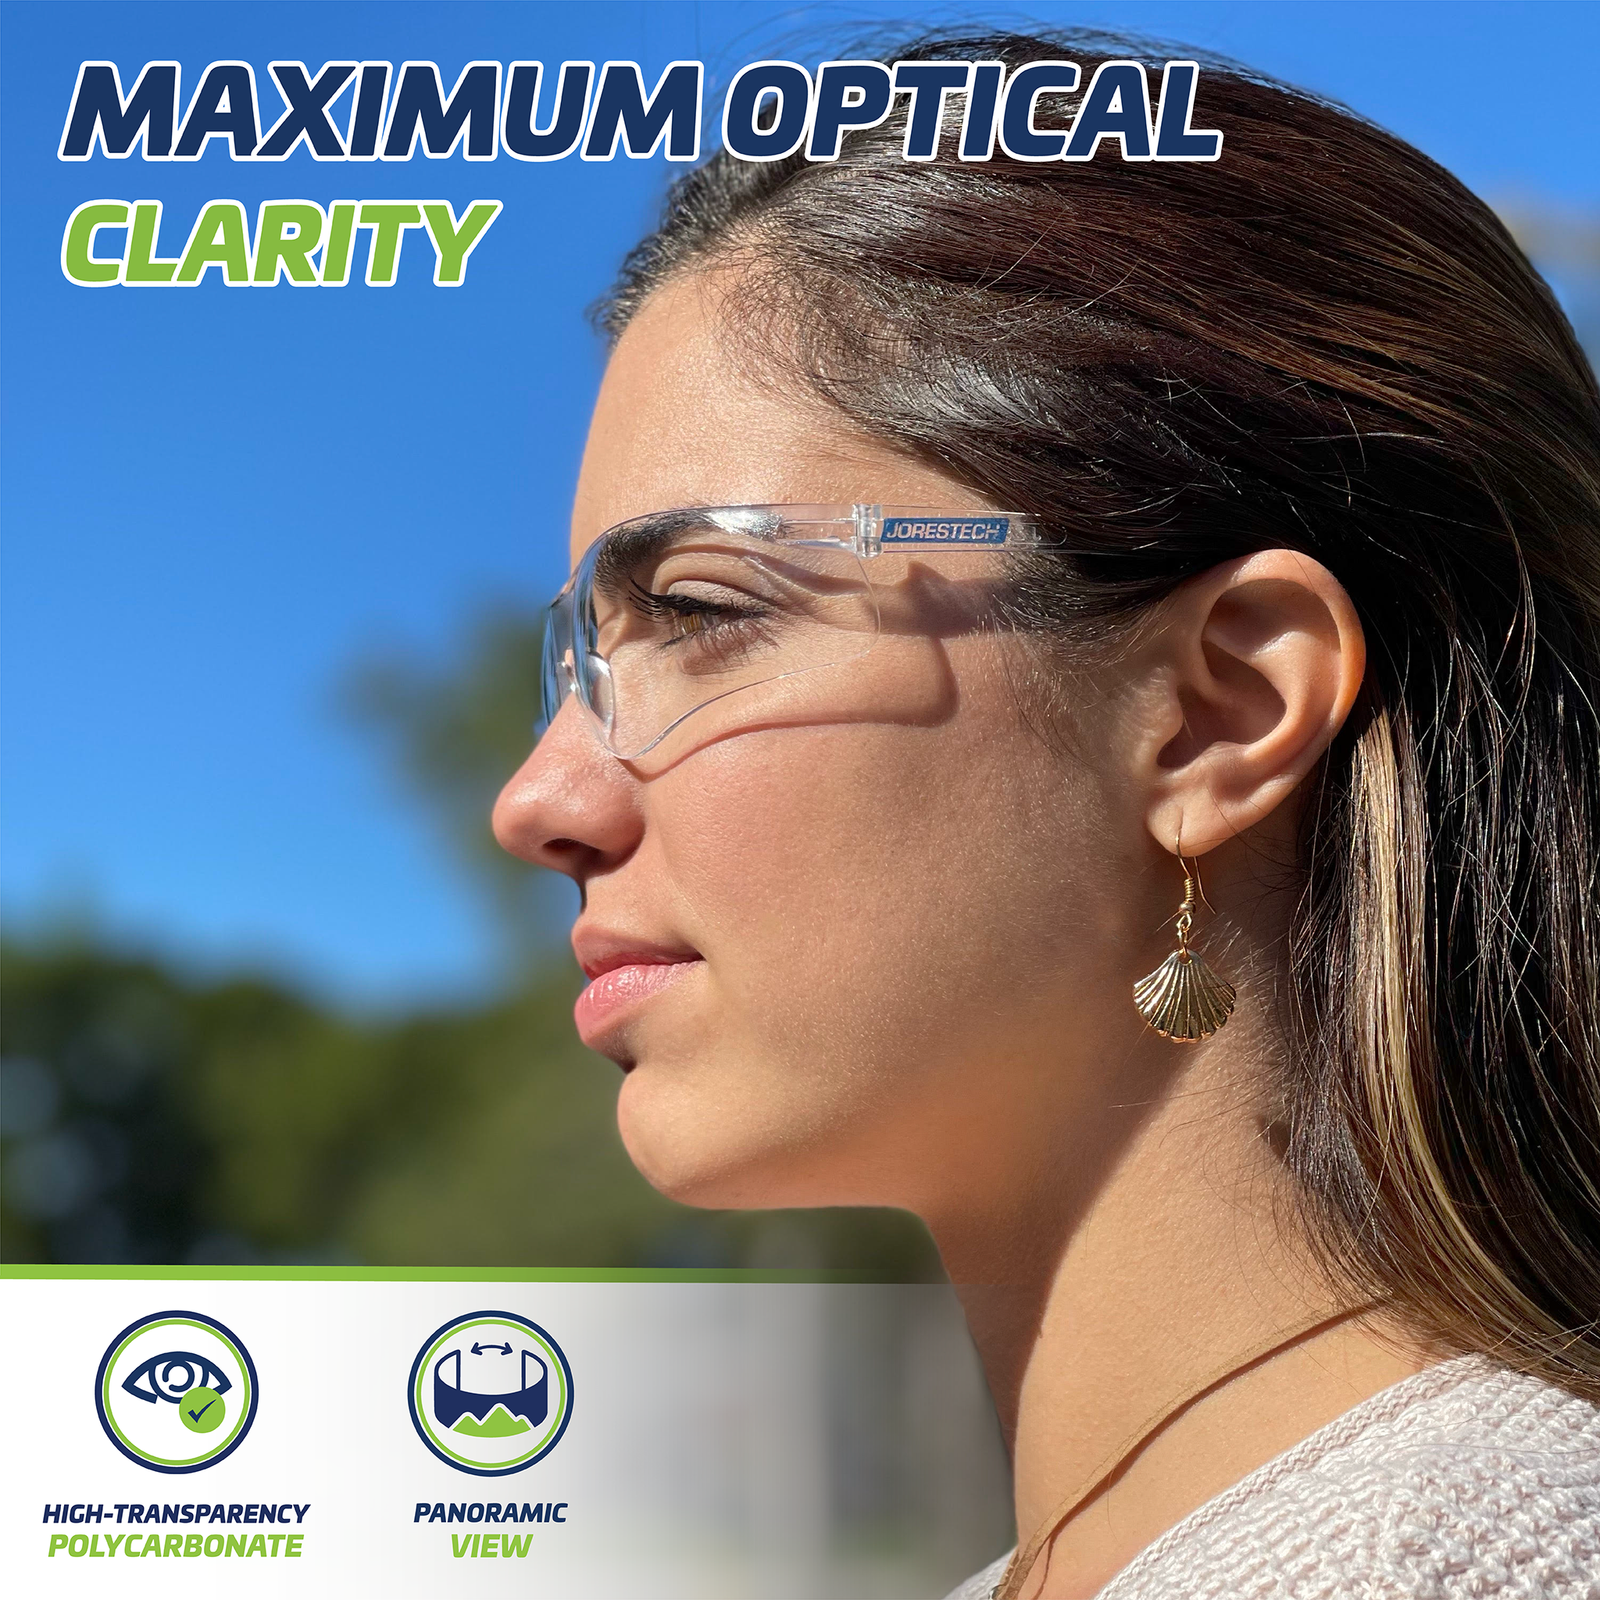 A woman wearing the clear JORESTECH safety lenses for high impact. Action takes place in an outdoors setting. Text and  icons read:  Maximun optical clarity, high transparency polycarbonate and panoramic view.